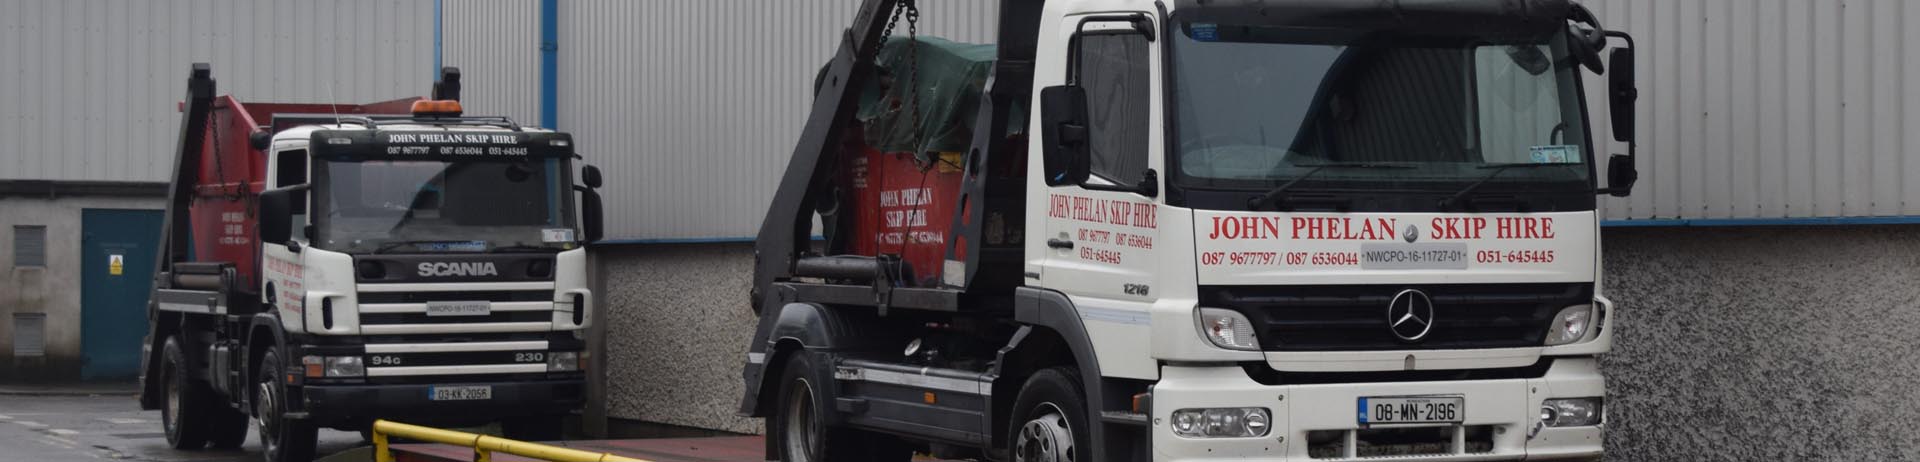 skip hire in carlow image